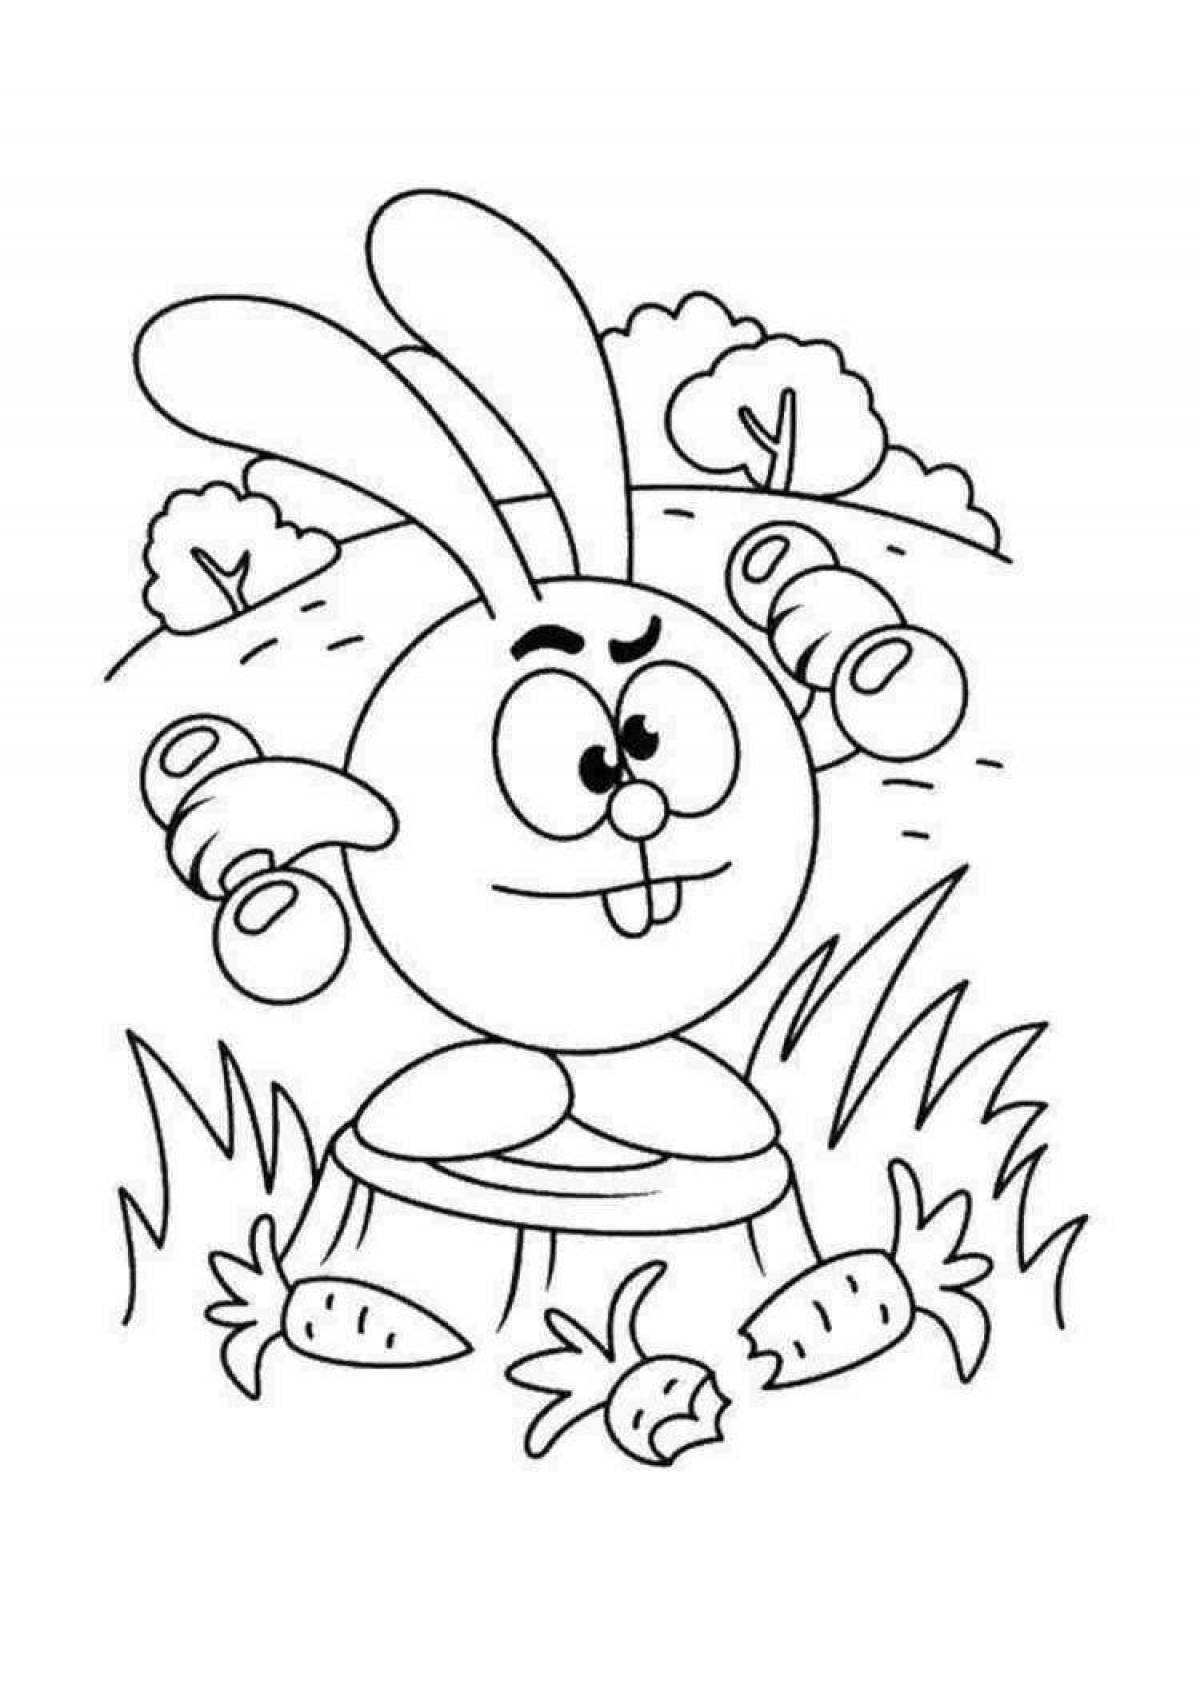 Radiant coloring page baby crumb